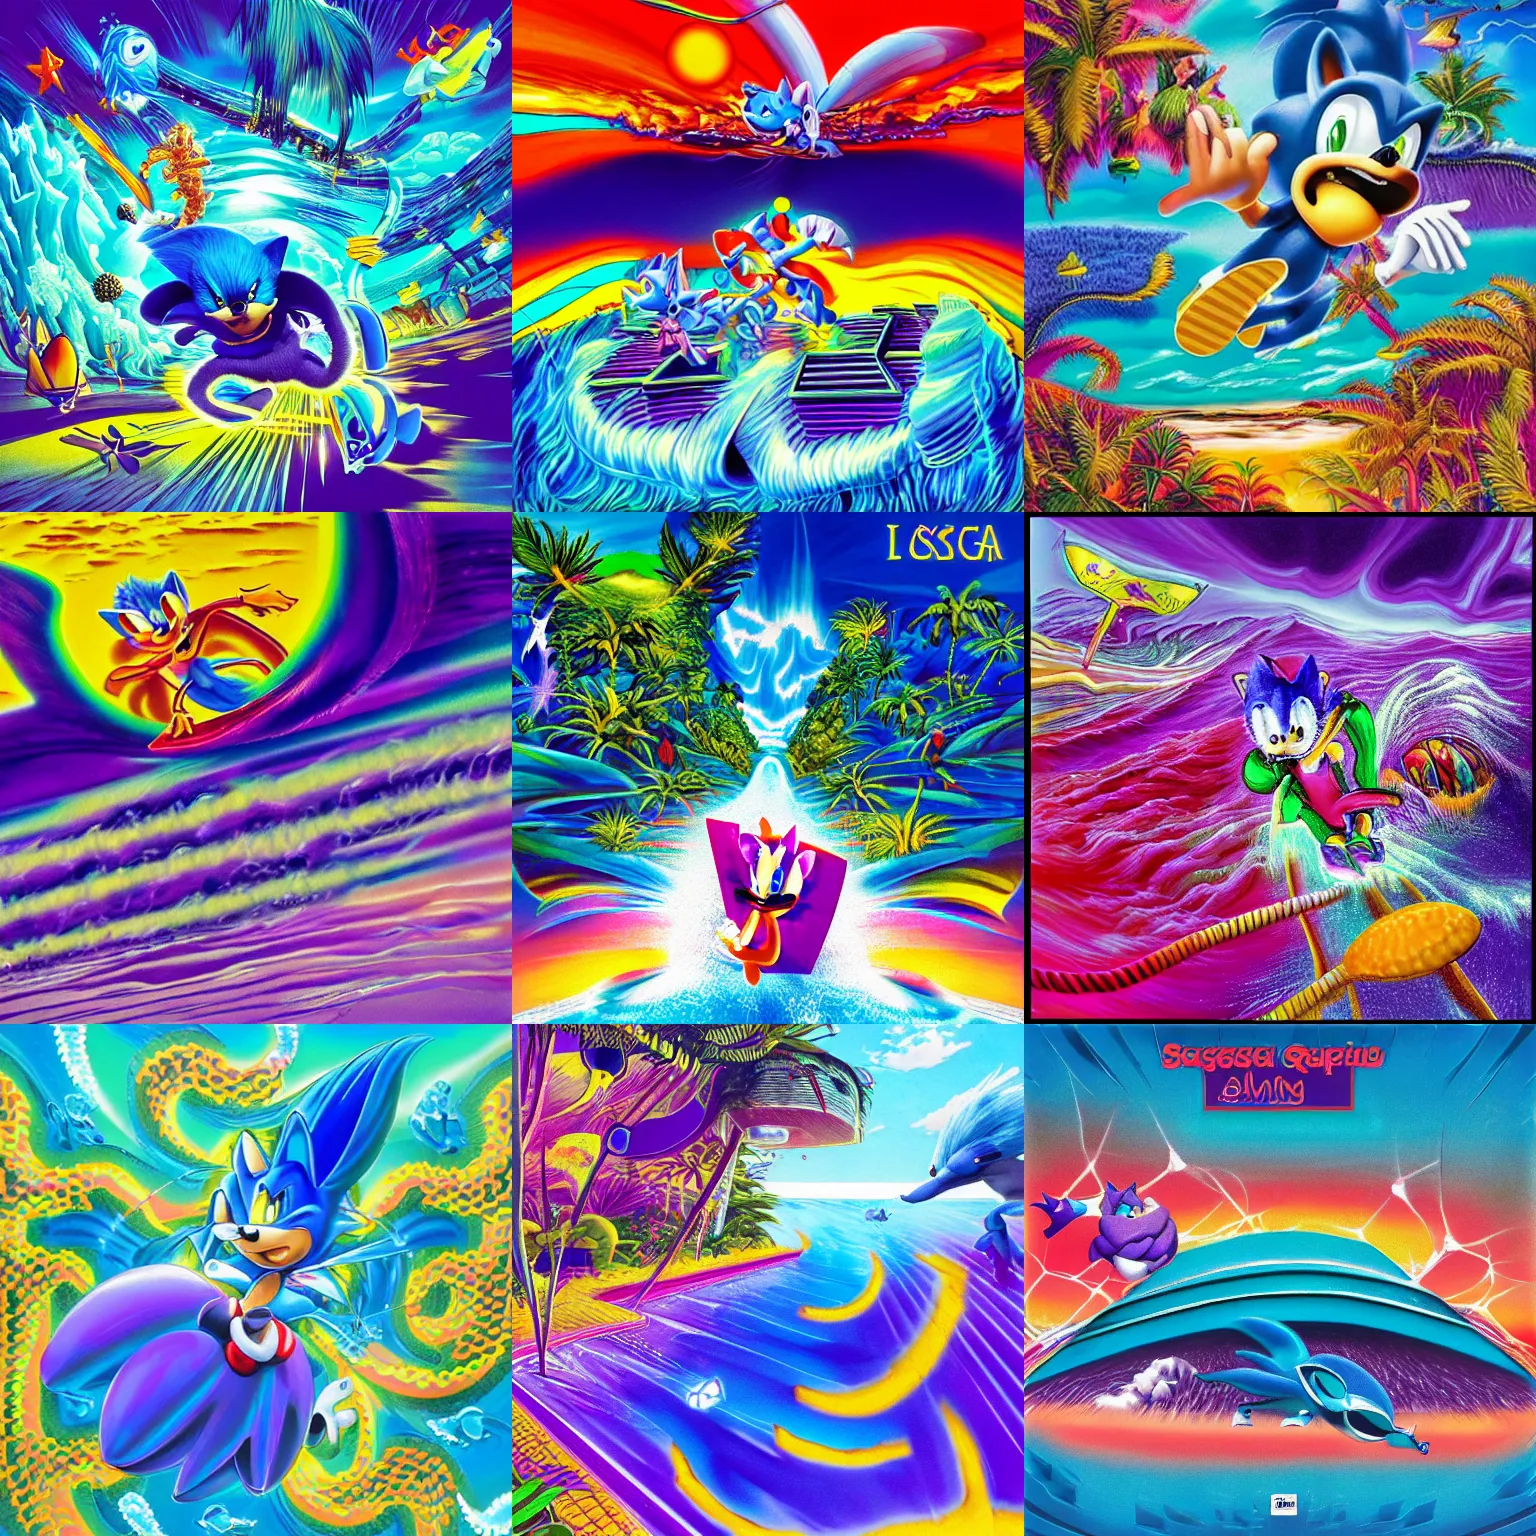 Prompt: surreal, sharp, detailed professional, high quality airbrush art MGMT album cover of a liquid dissolving LSD DMT blue sonic the hedgehog surfing through cyberspace, tropical ocean, purple checkerboard background, 1990s 1992 Sega Genesis video game album cover